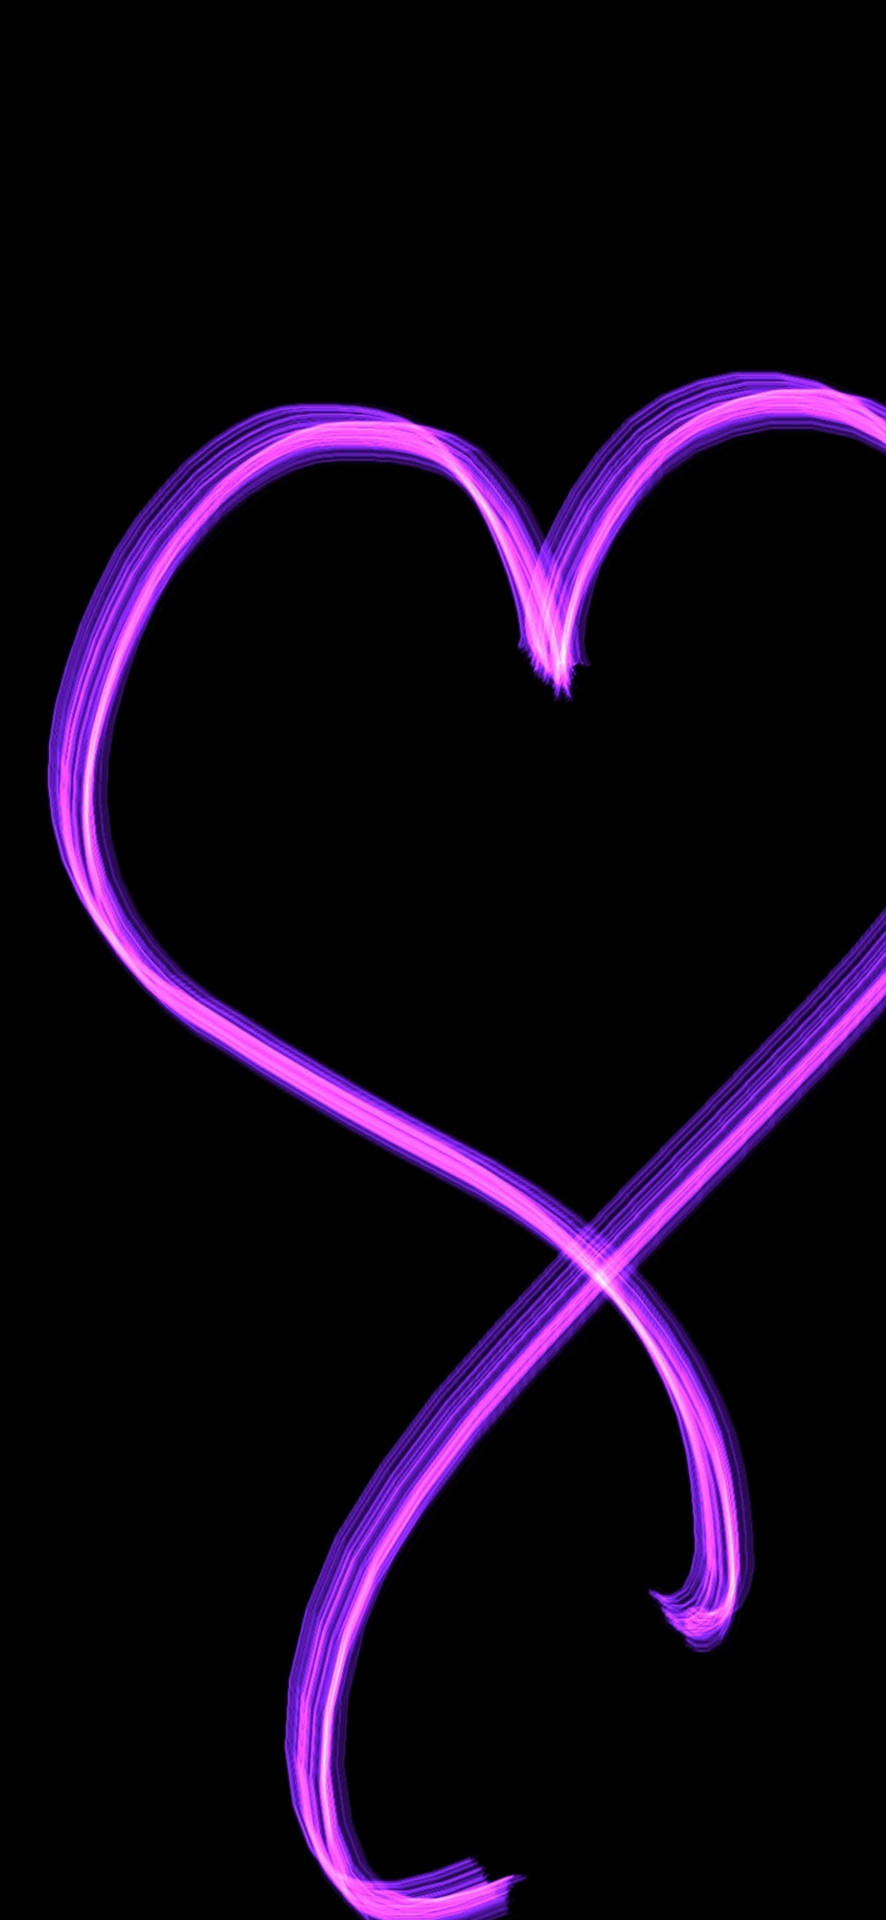 Download Black And Purple Aesthetic Heart Drawing Wallpaper